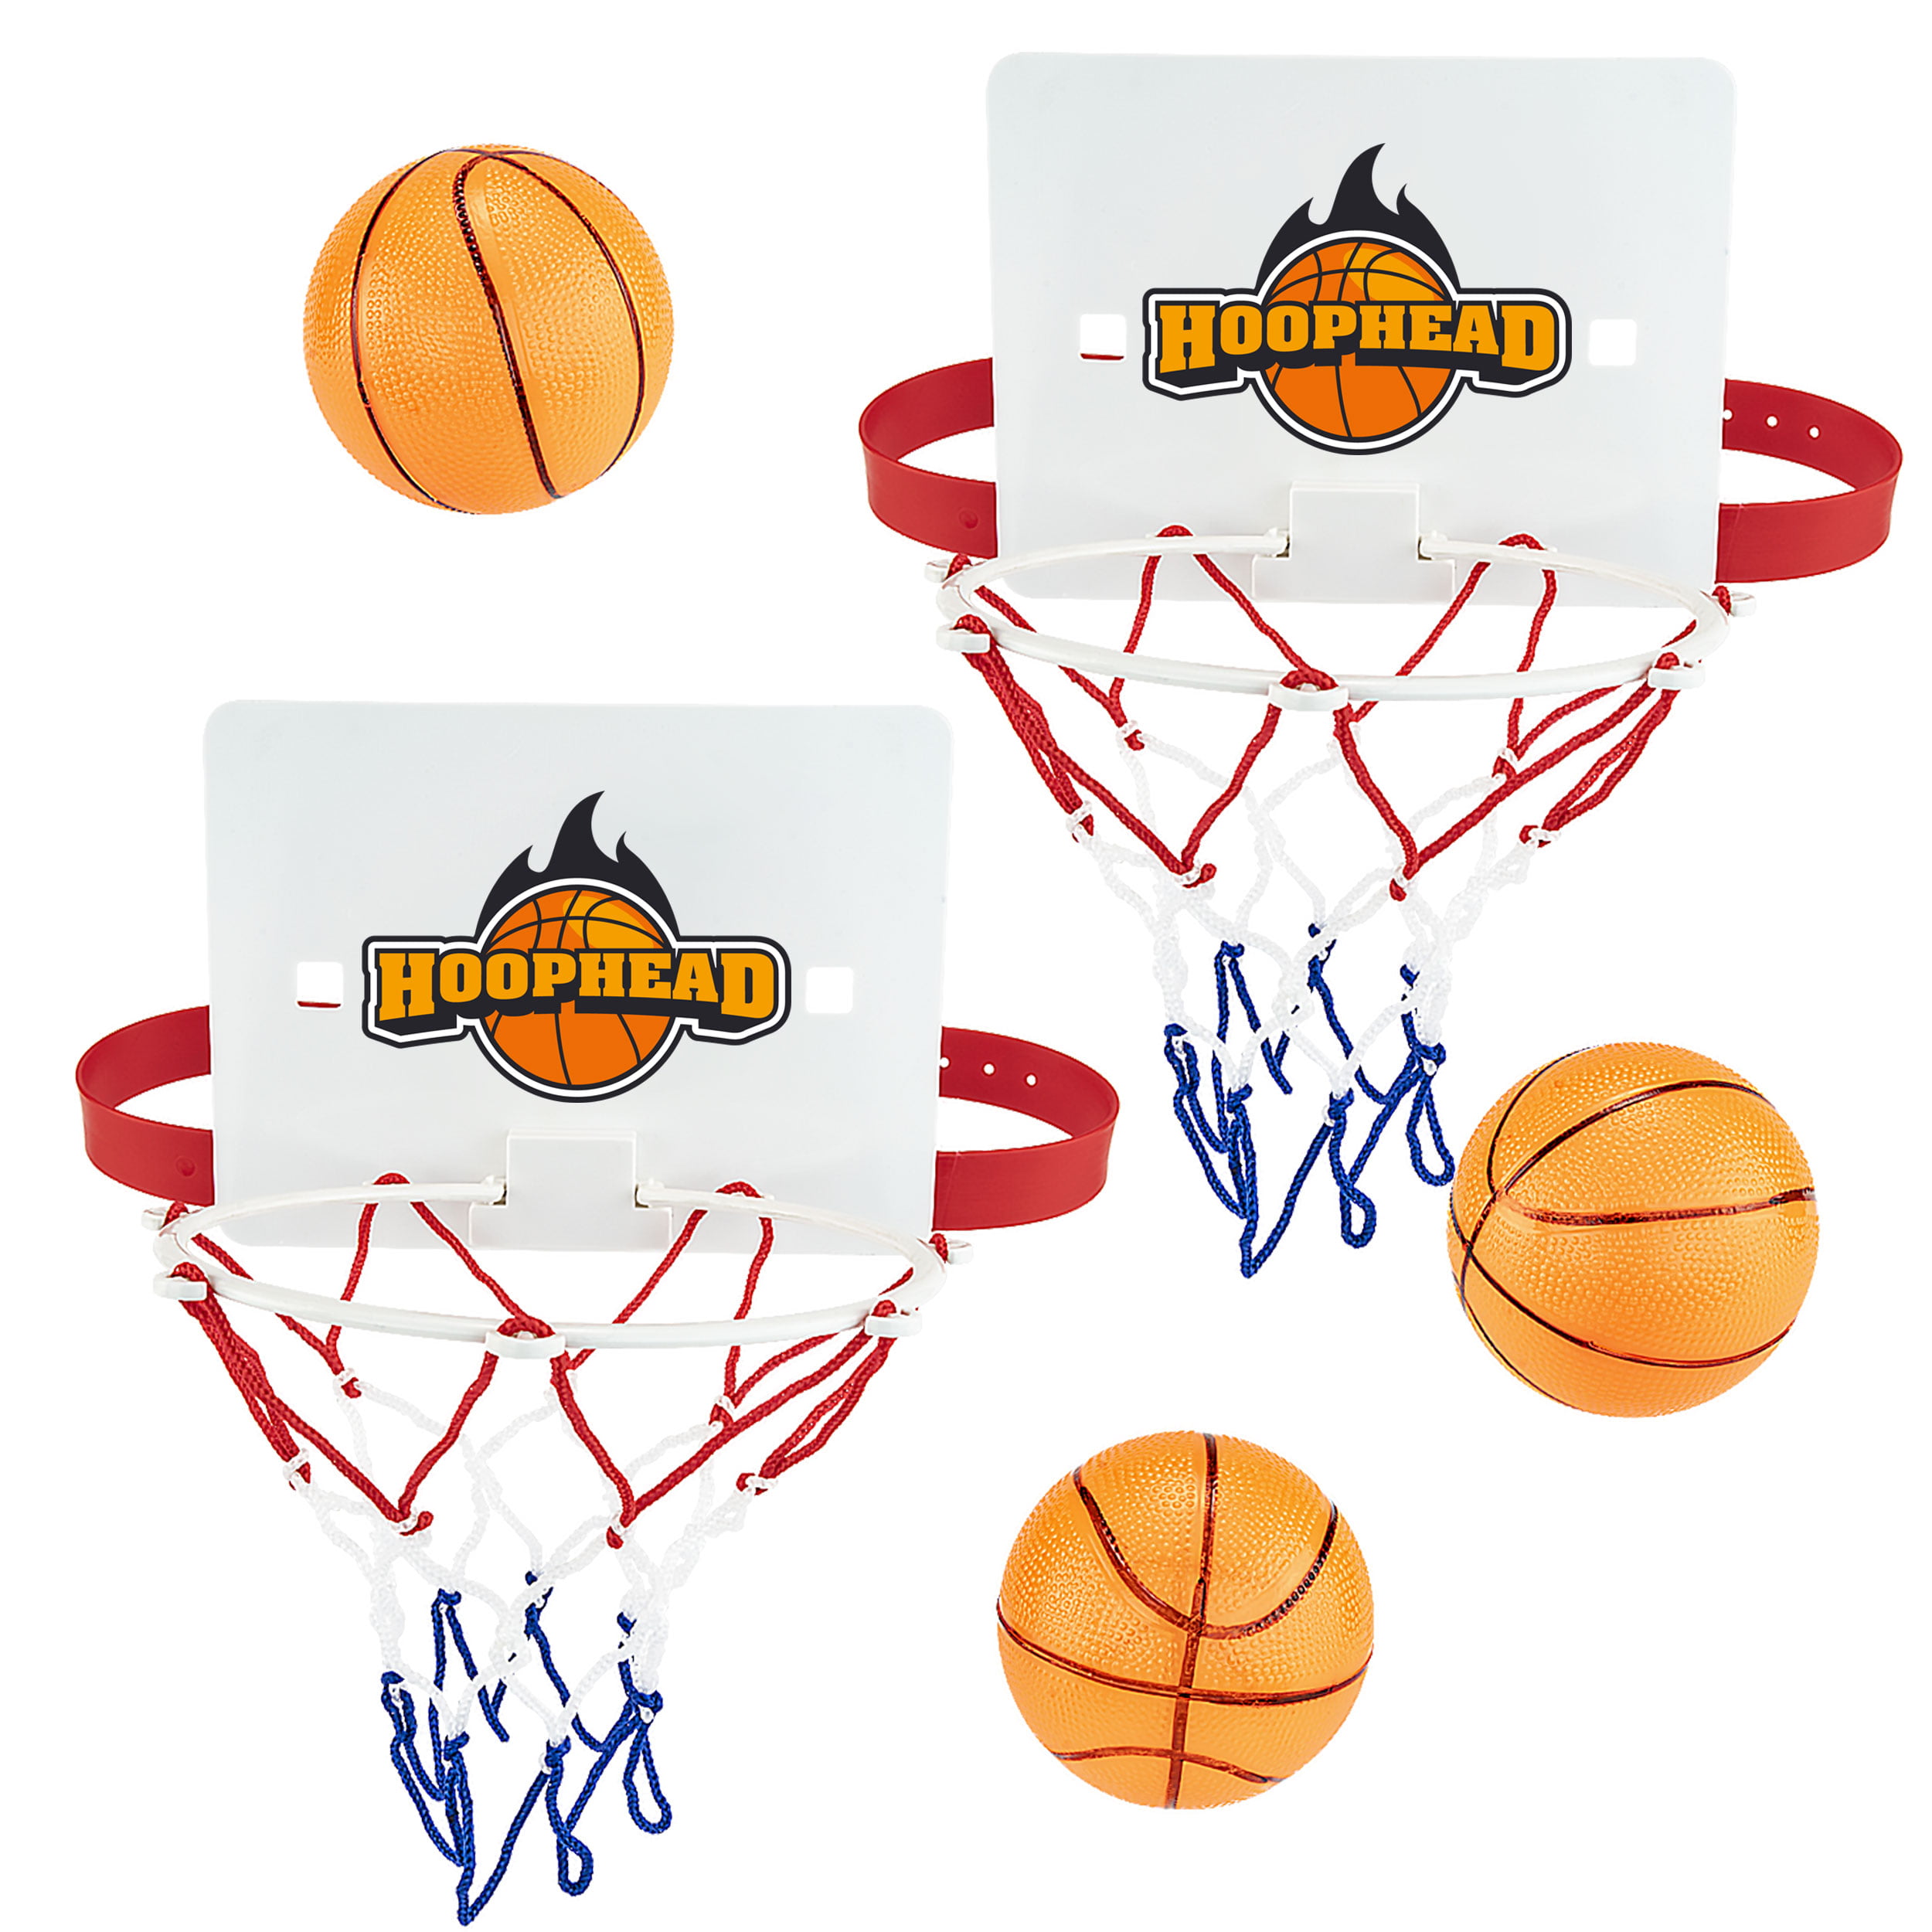 Head Basketball Contest HoopHead Sports Game Two Player for Kids Fun Competition 